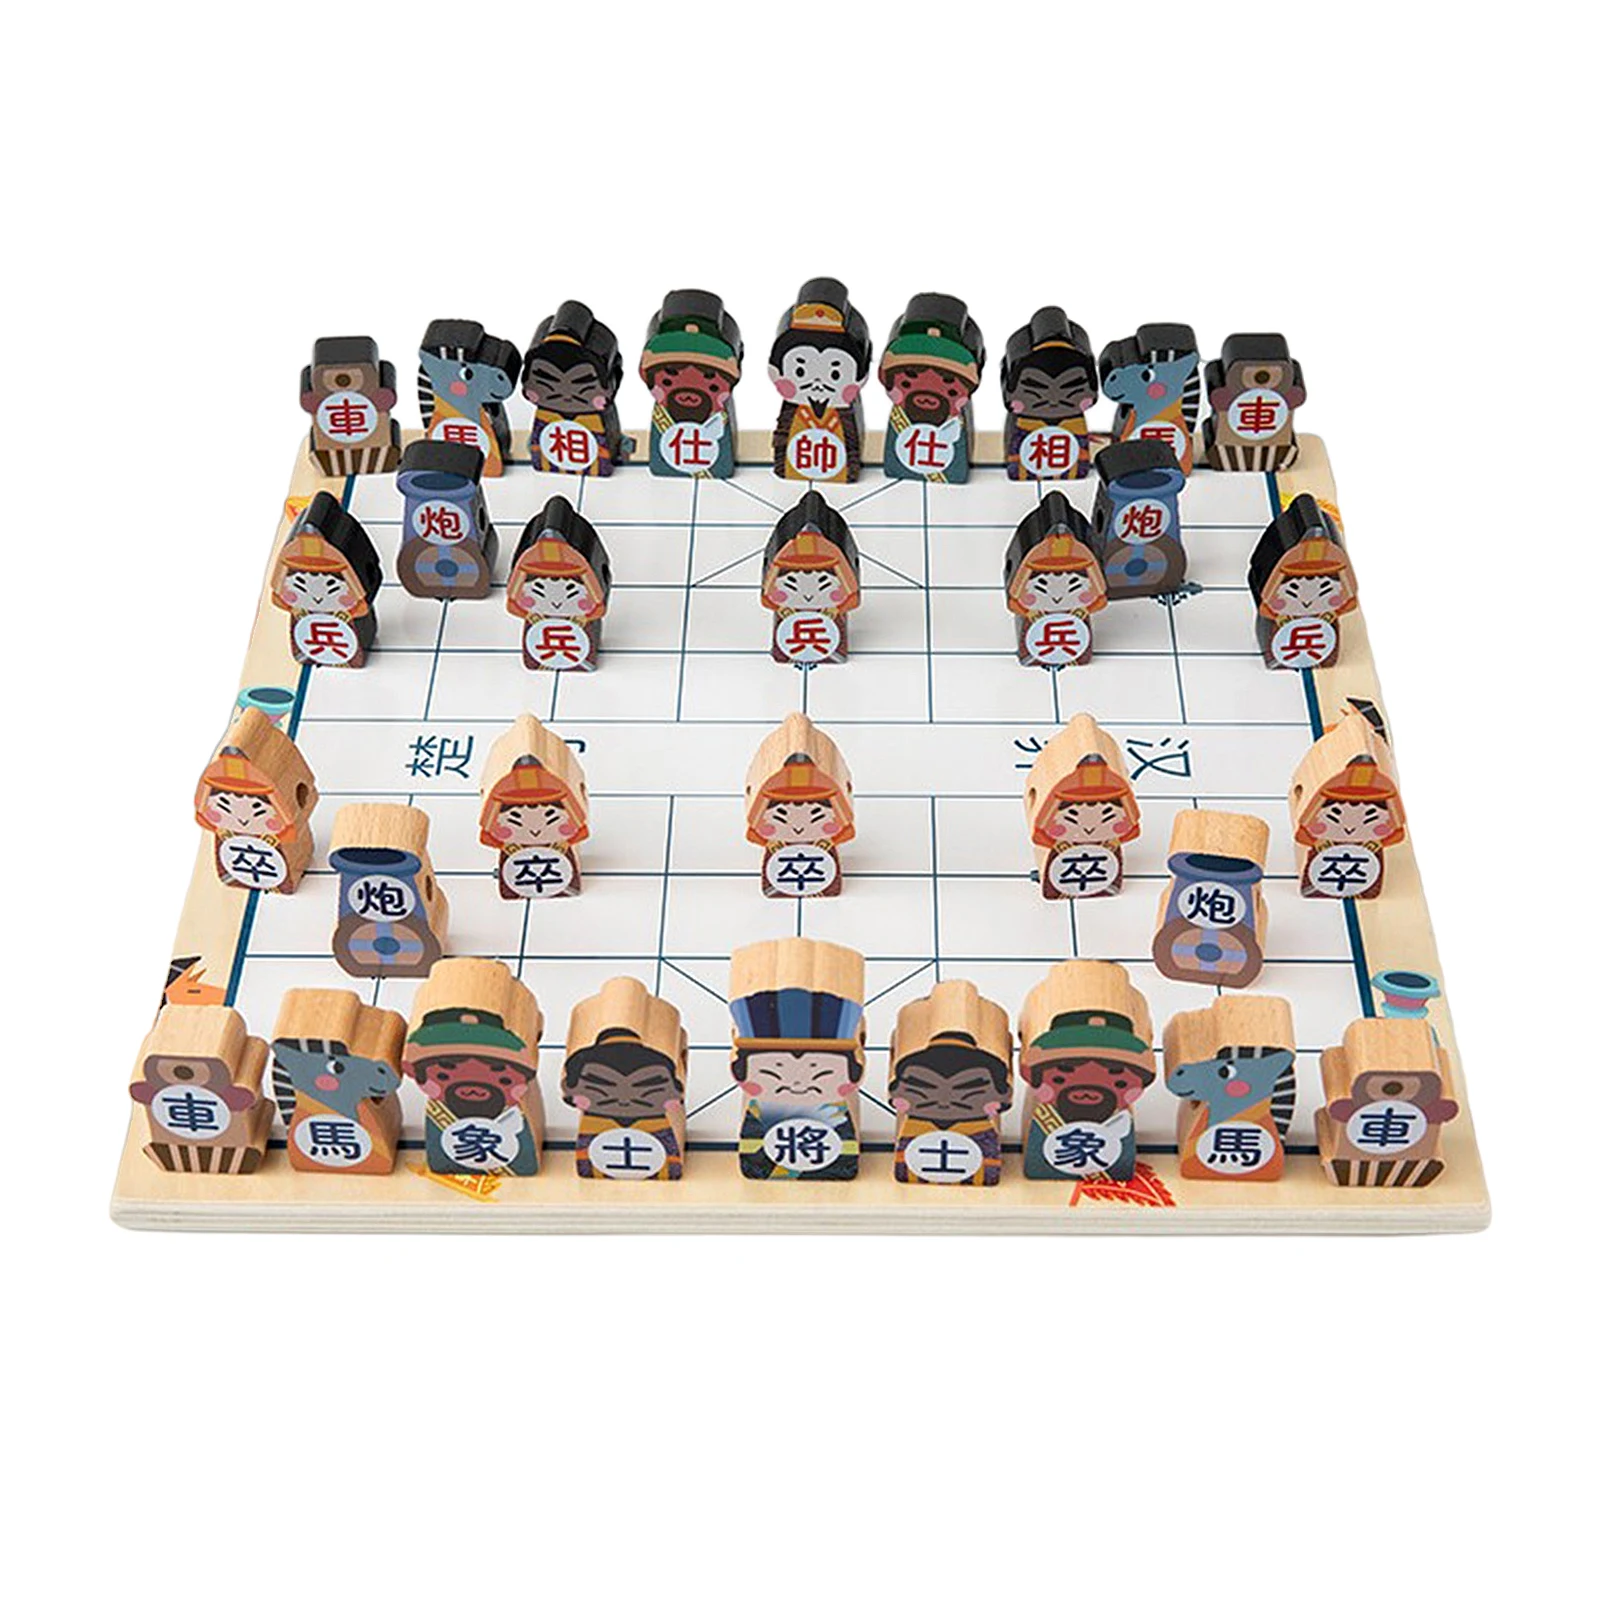 Wooden Vintage Chess Game King Soldier Chessman Chessboard Set Table Top Board Game for Kids Family Toy 30x30